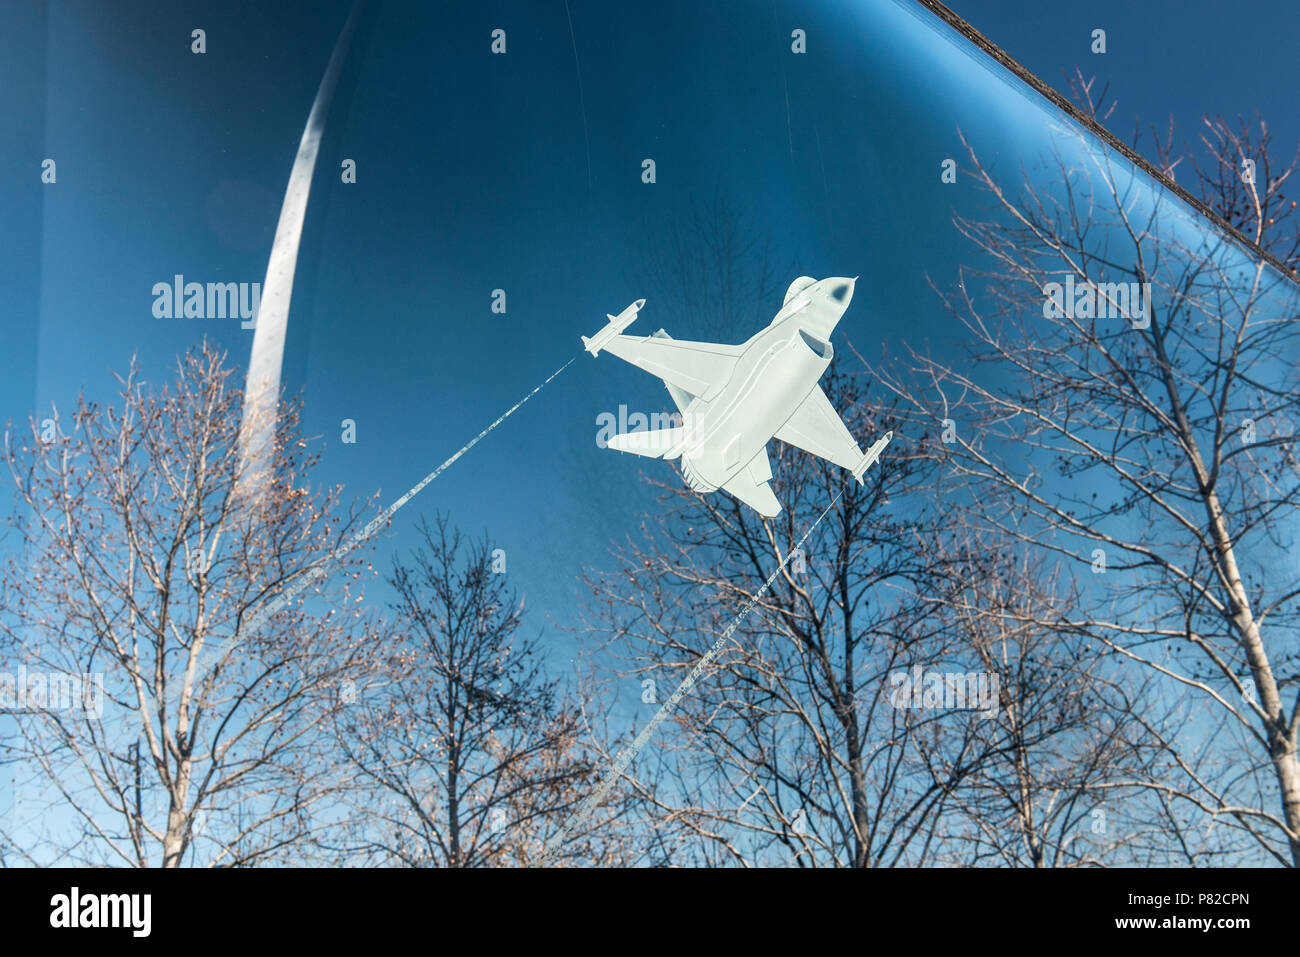 ARLINGTON, Virginia, USA - An F-16 Fighting Falcon etched into a glass panel at the US Air Force Memorial in Arlington, VA. In the background are the main spires of the memorial that are intepretations of the US Air Force Thunderbirds signature bomb burst maneuver. Stock Photo